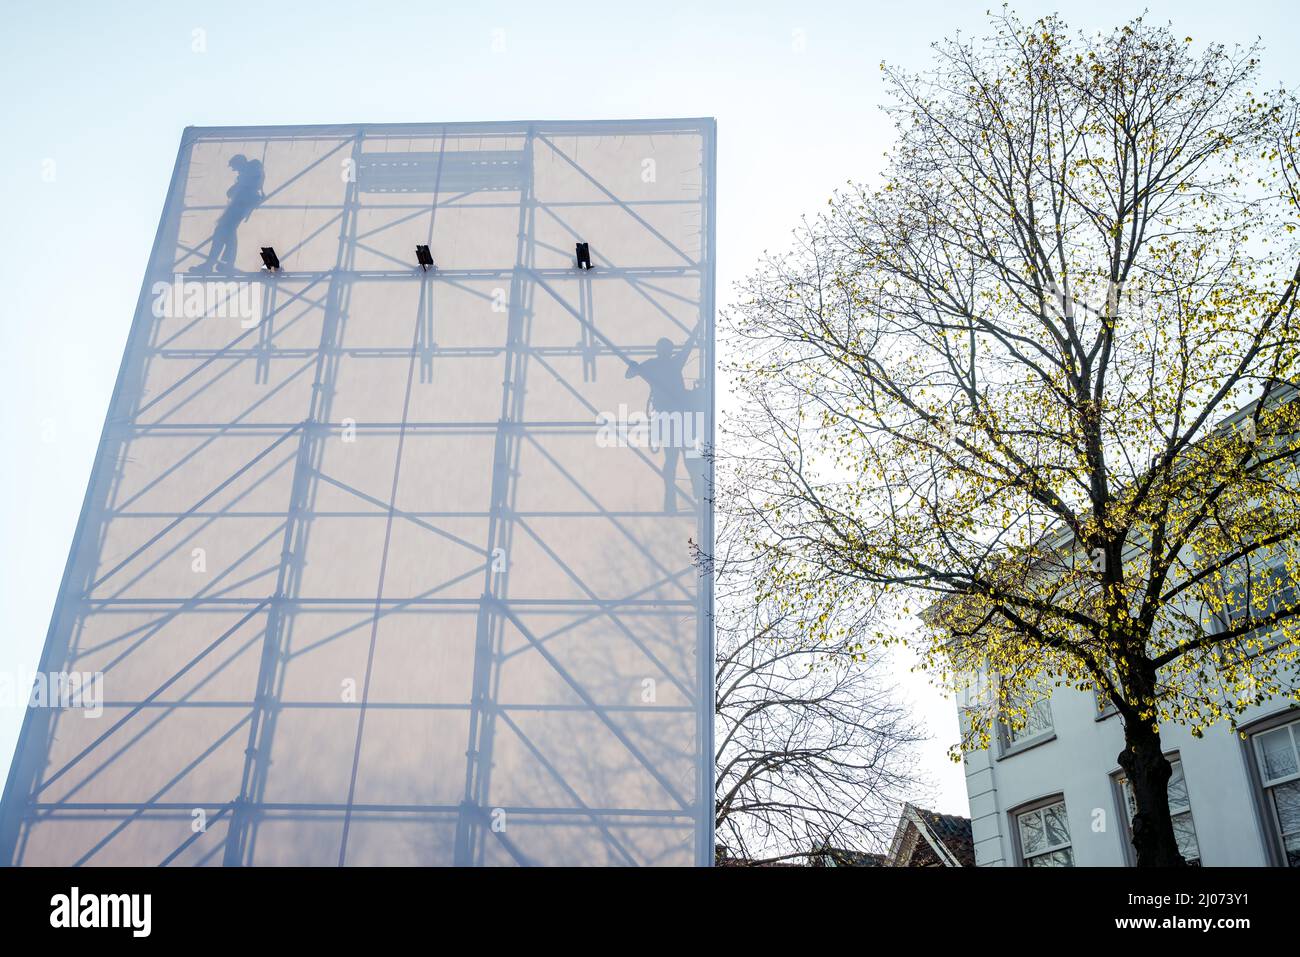 Dordrecht, Netherlands - April 15, 2019: Shadows and silhouettes on white canvas sheet in The Passion. Workmen constructing the scaffolding of tempora Stock Photo